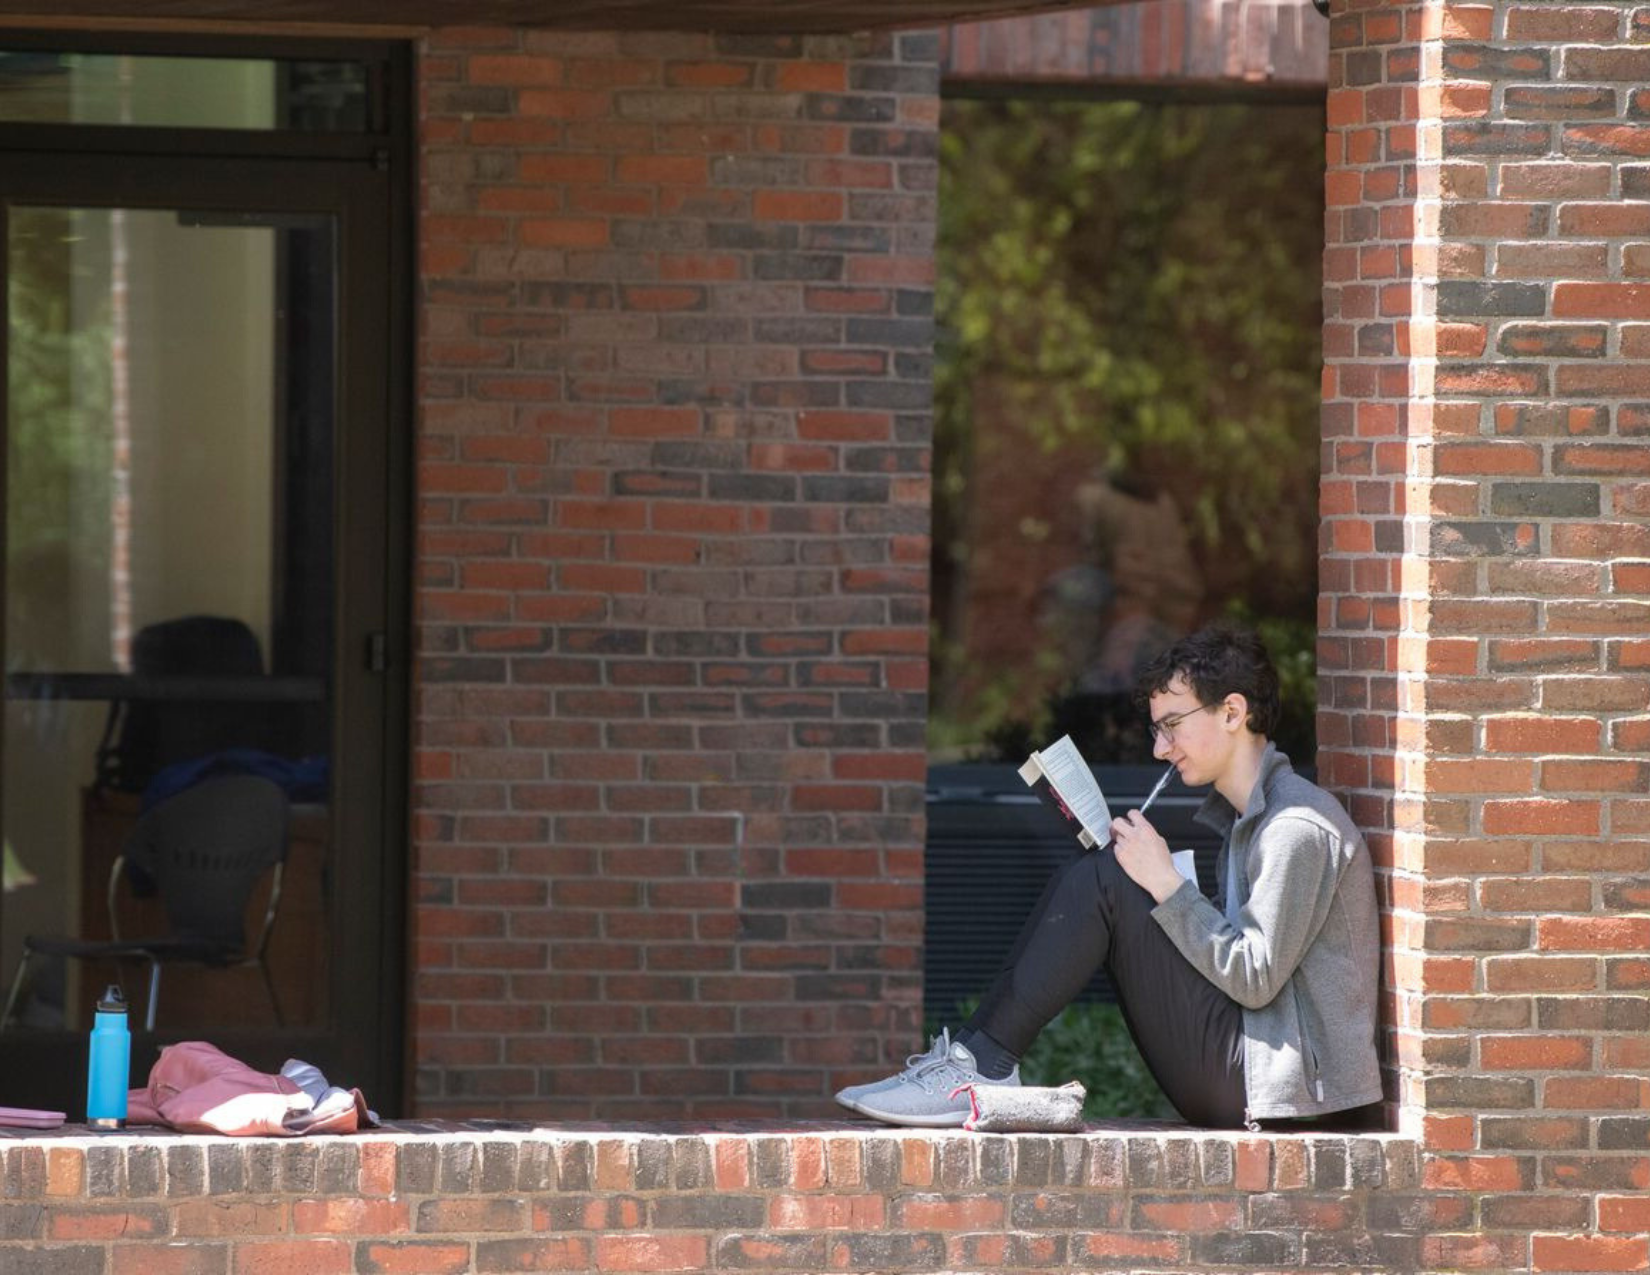 A student sits on the ledge of a brick building reading a book.